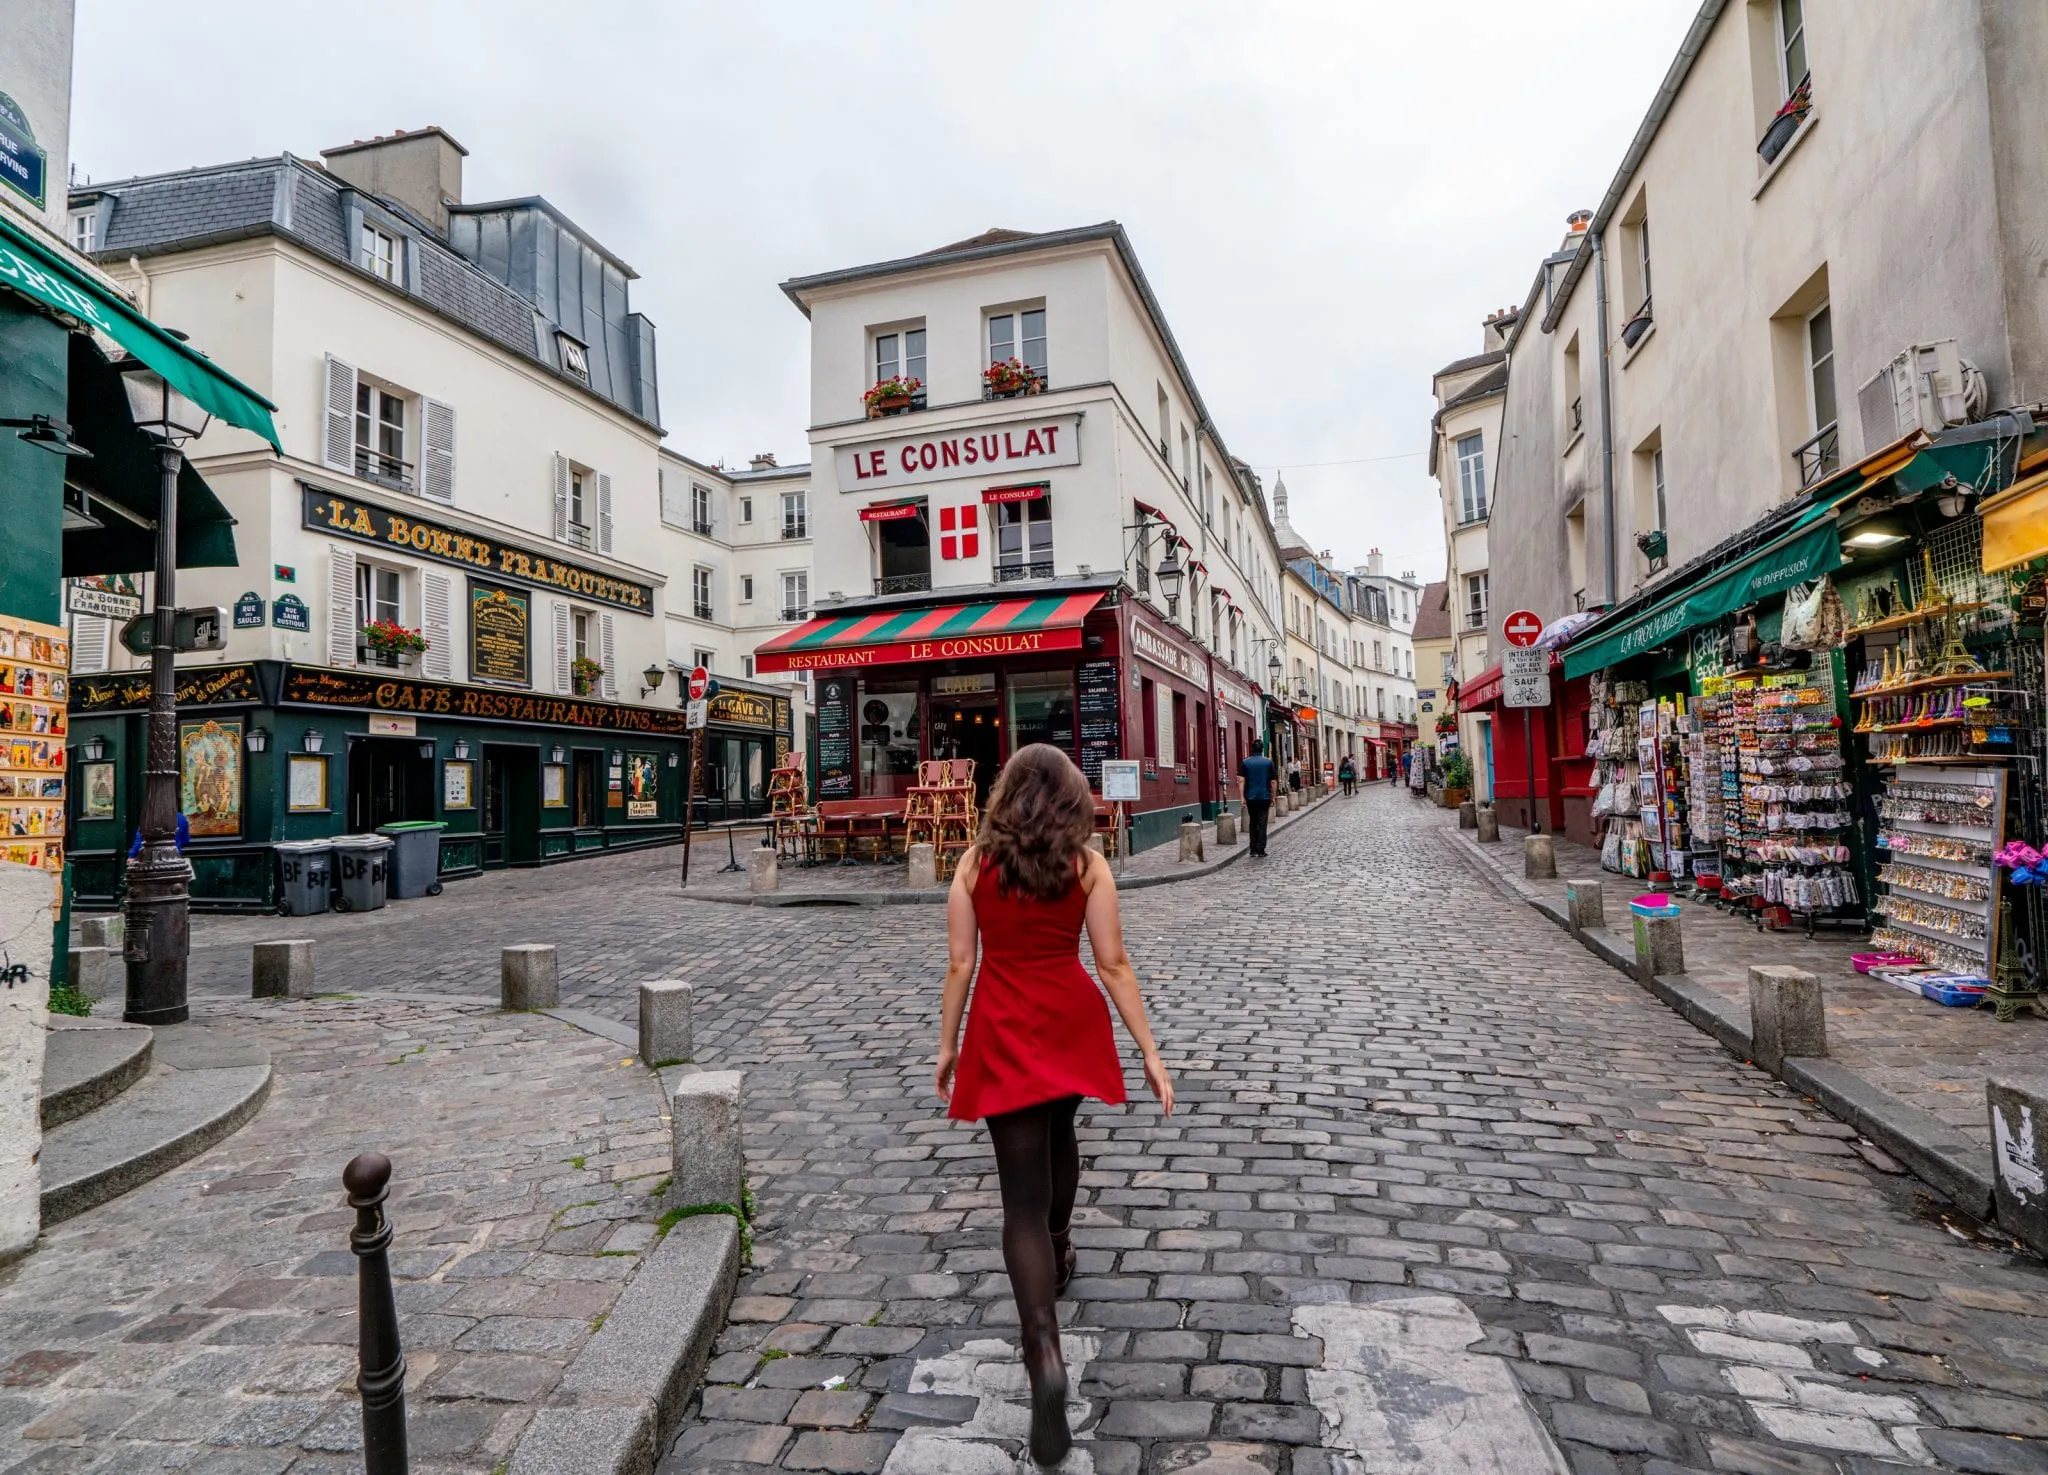 Kate Storm in a red dress in front of la consulat cafe, one of the best things to do in montmartre paris